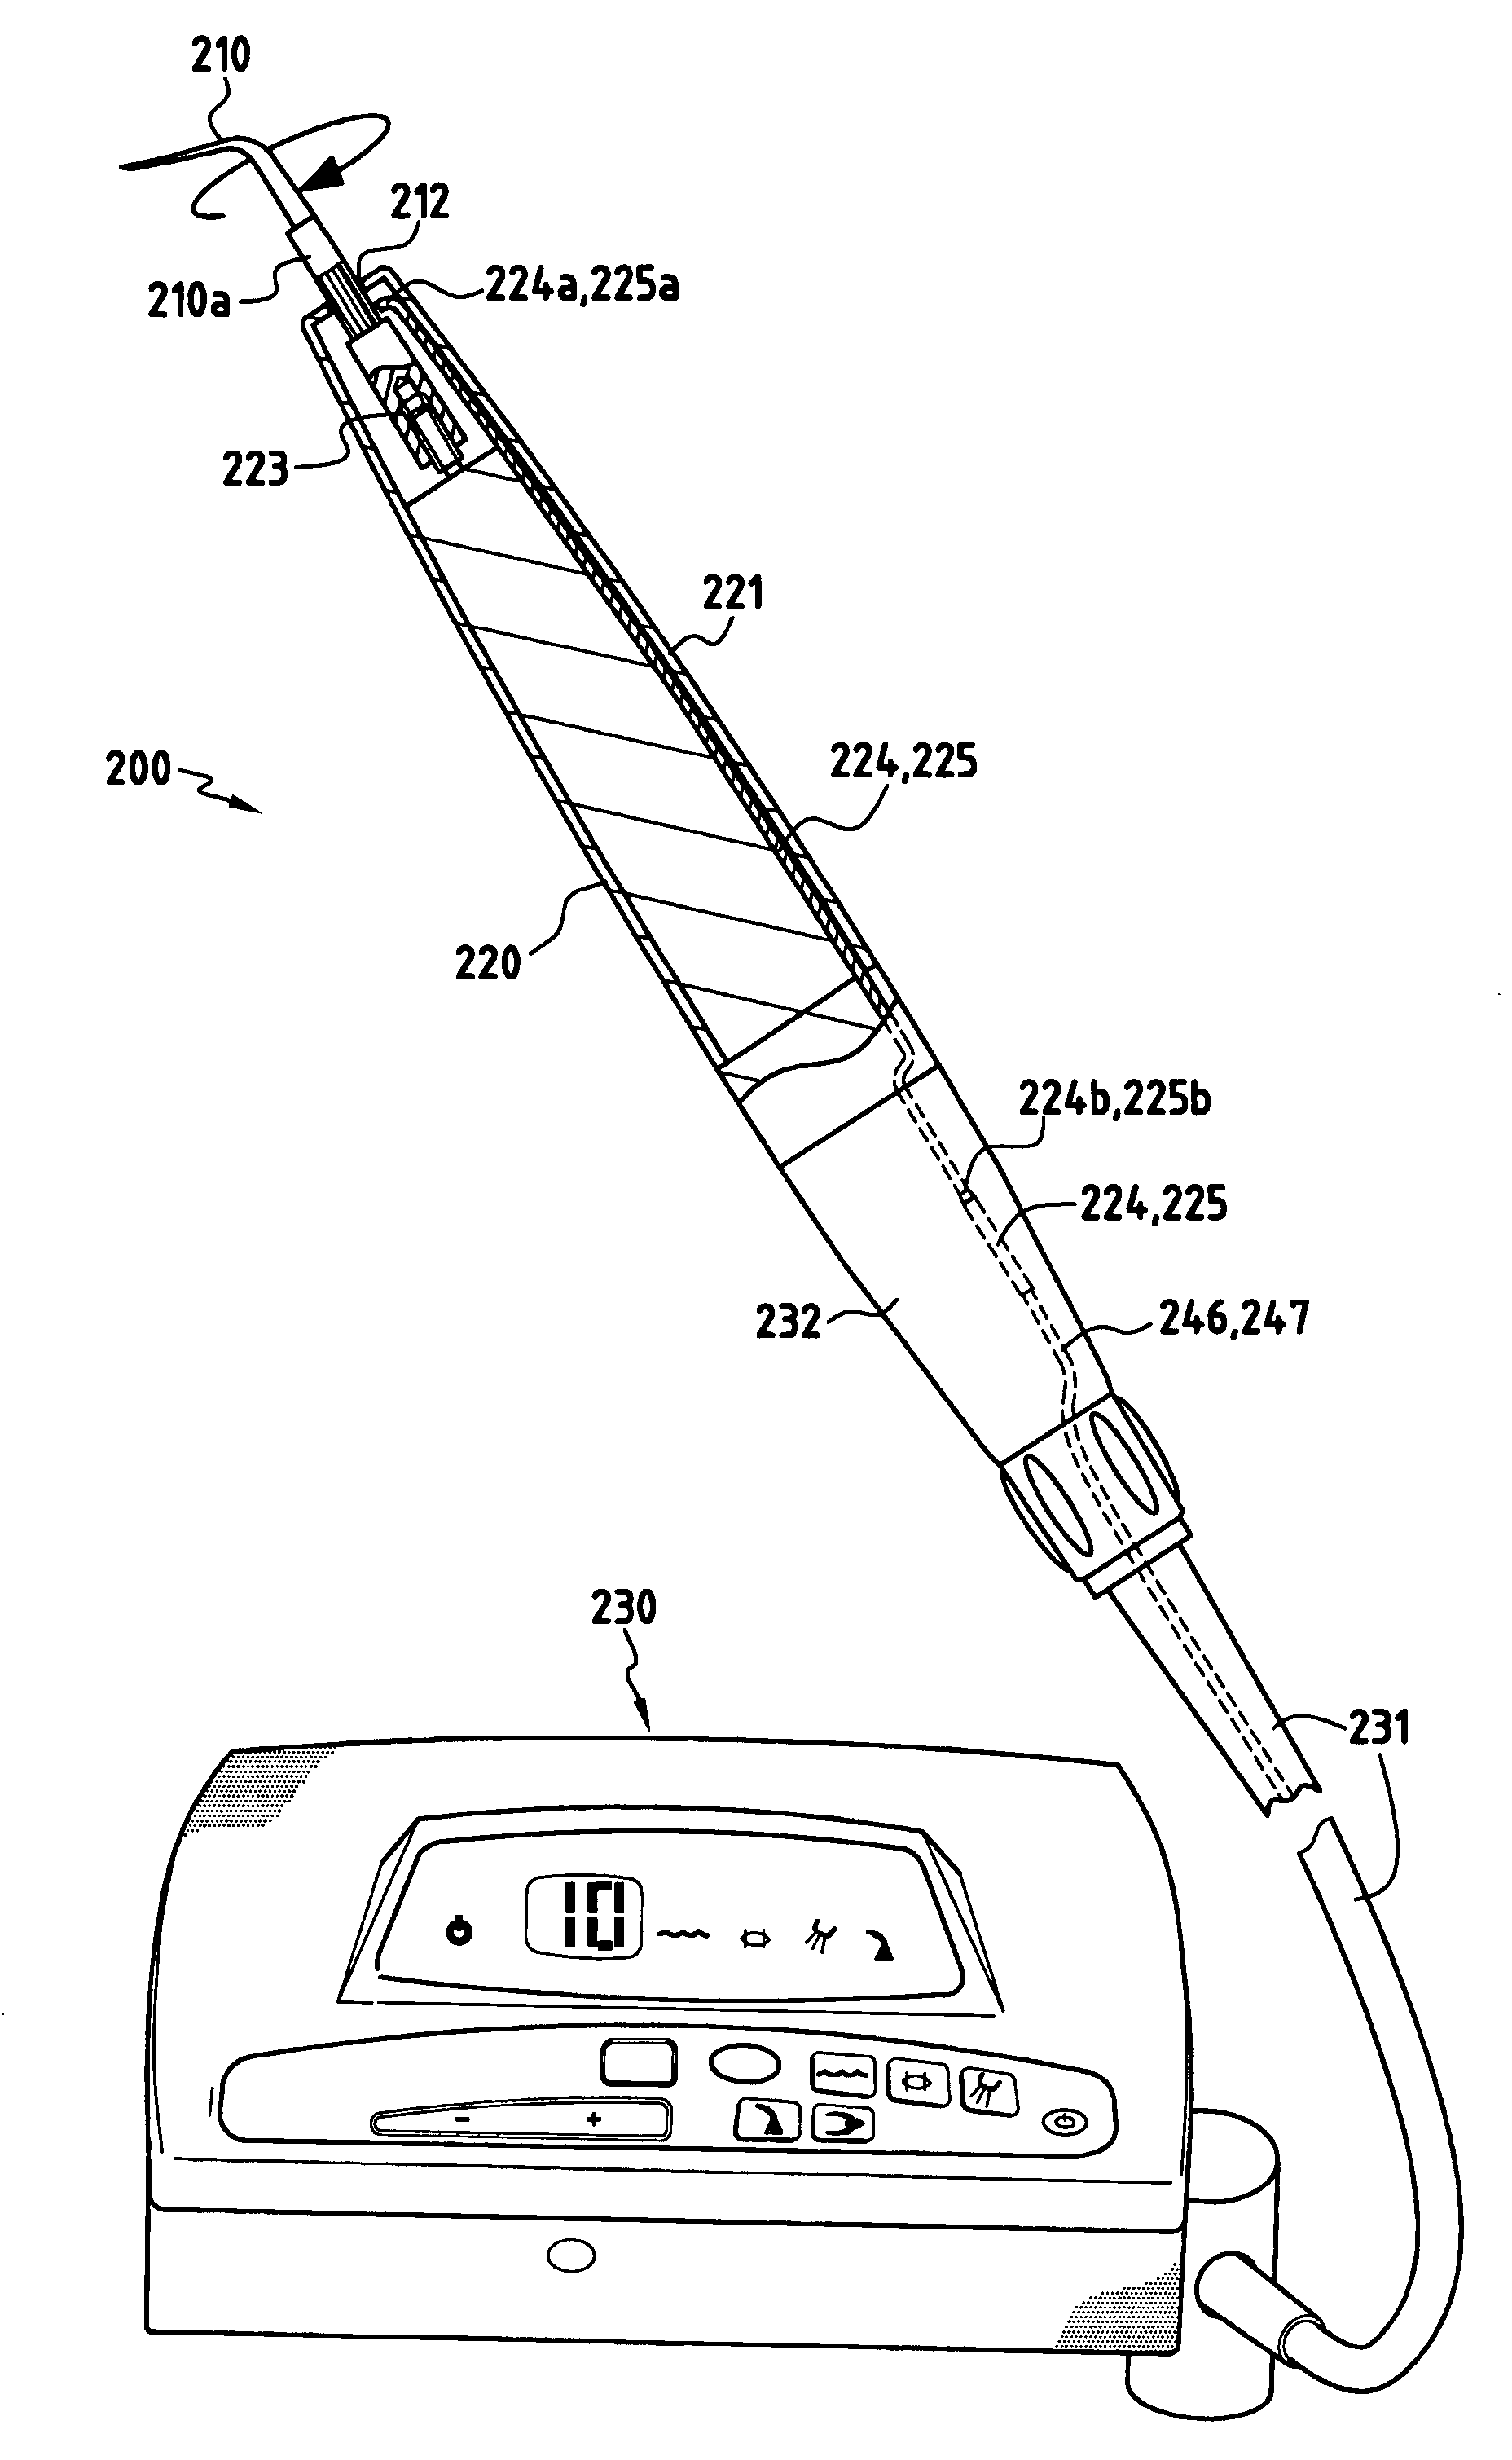 Dental Treatment Apparatus With Automatic Tip Recognition